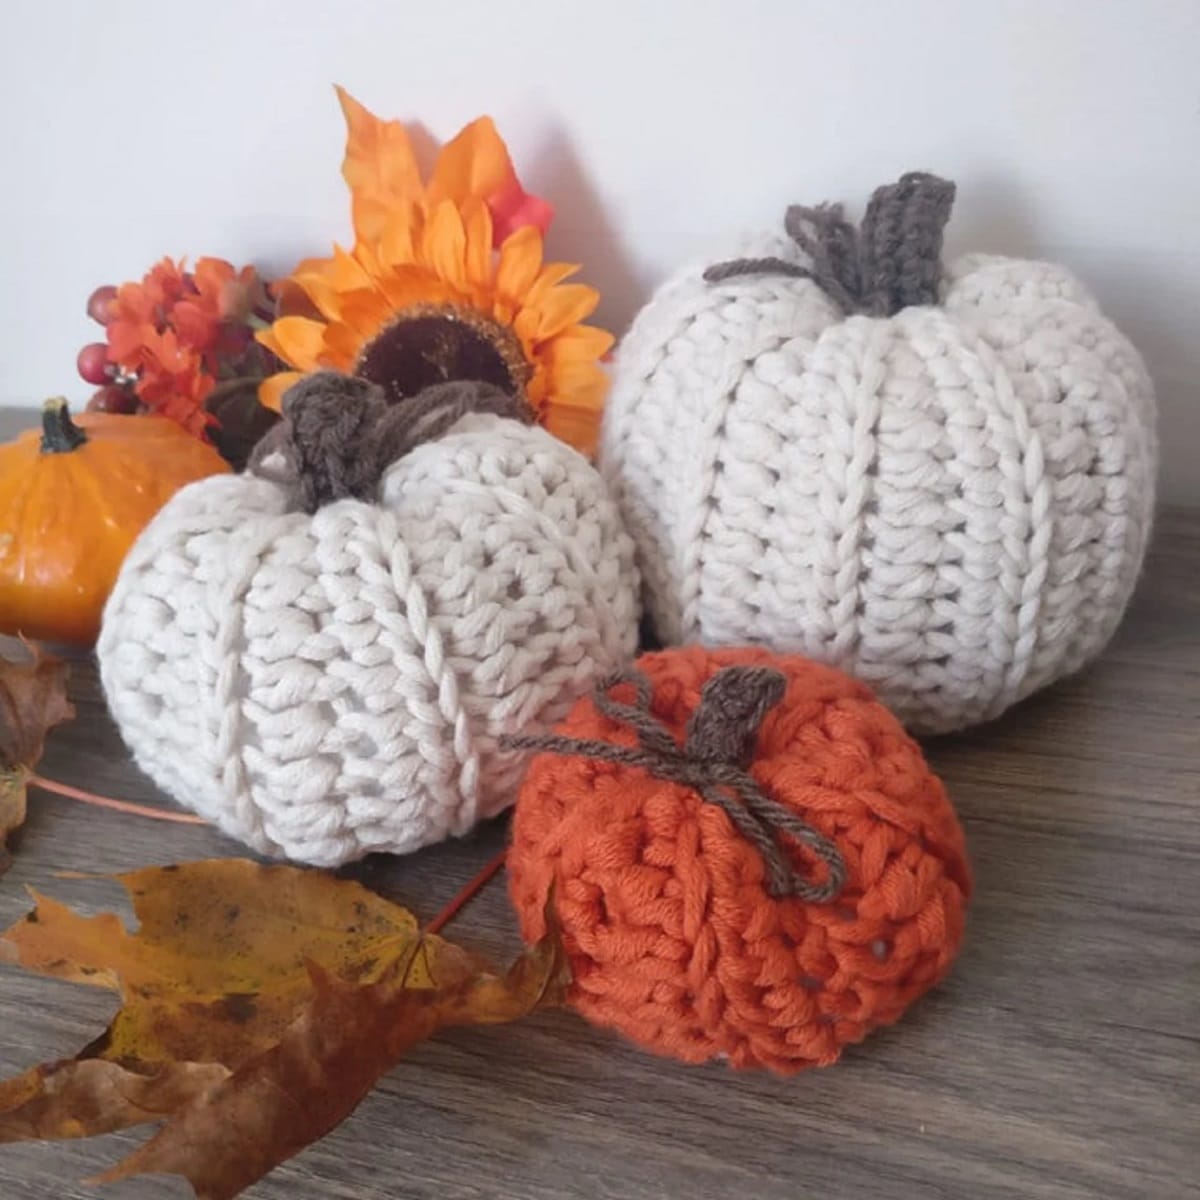 A small orange crochet pumpkin with a brown bow on top in front of two larger white crochet pumpkins on a wooden table.